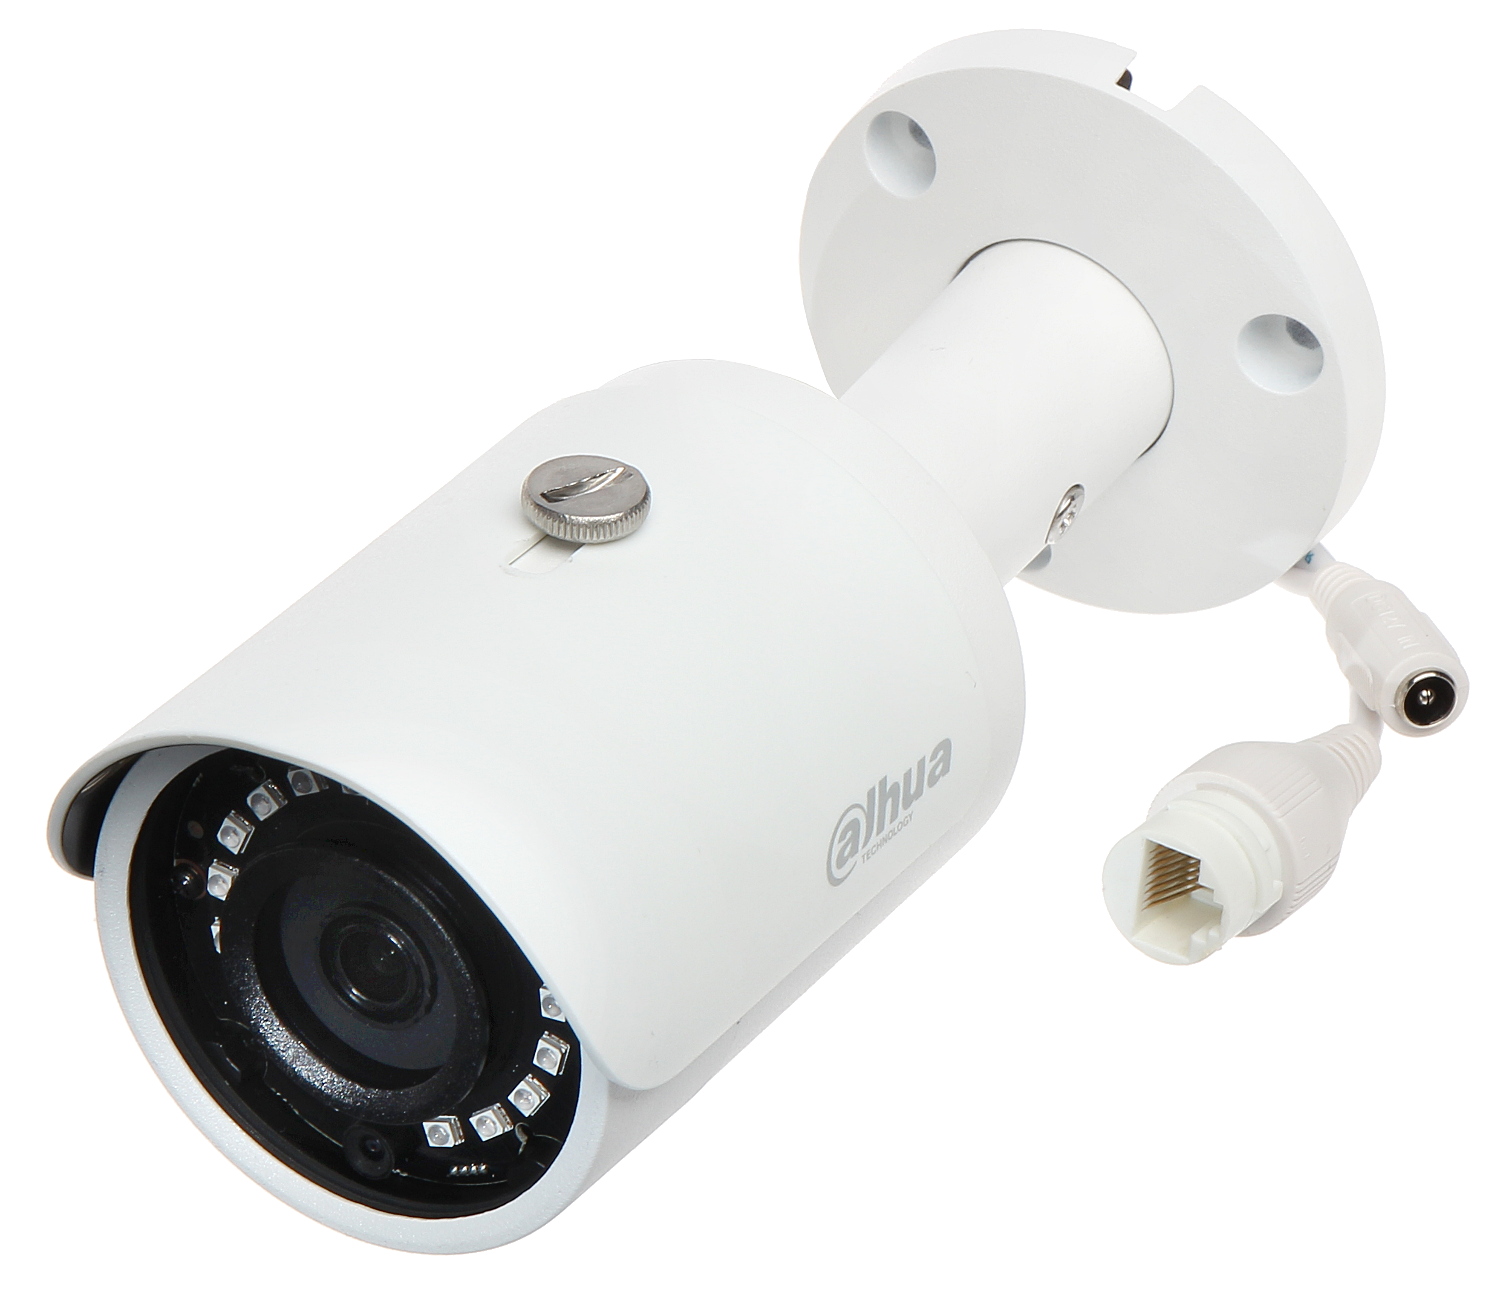 IP CAMERA IPC-HFW1431S-0280B-S4 4 Mpx 2.8 mm DAHUA - IP Cameras with  Fixed-Focal Lens and Ifra-Red Illumina... - Delta